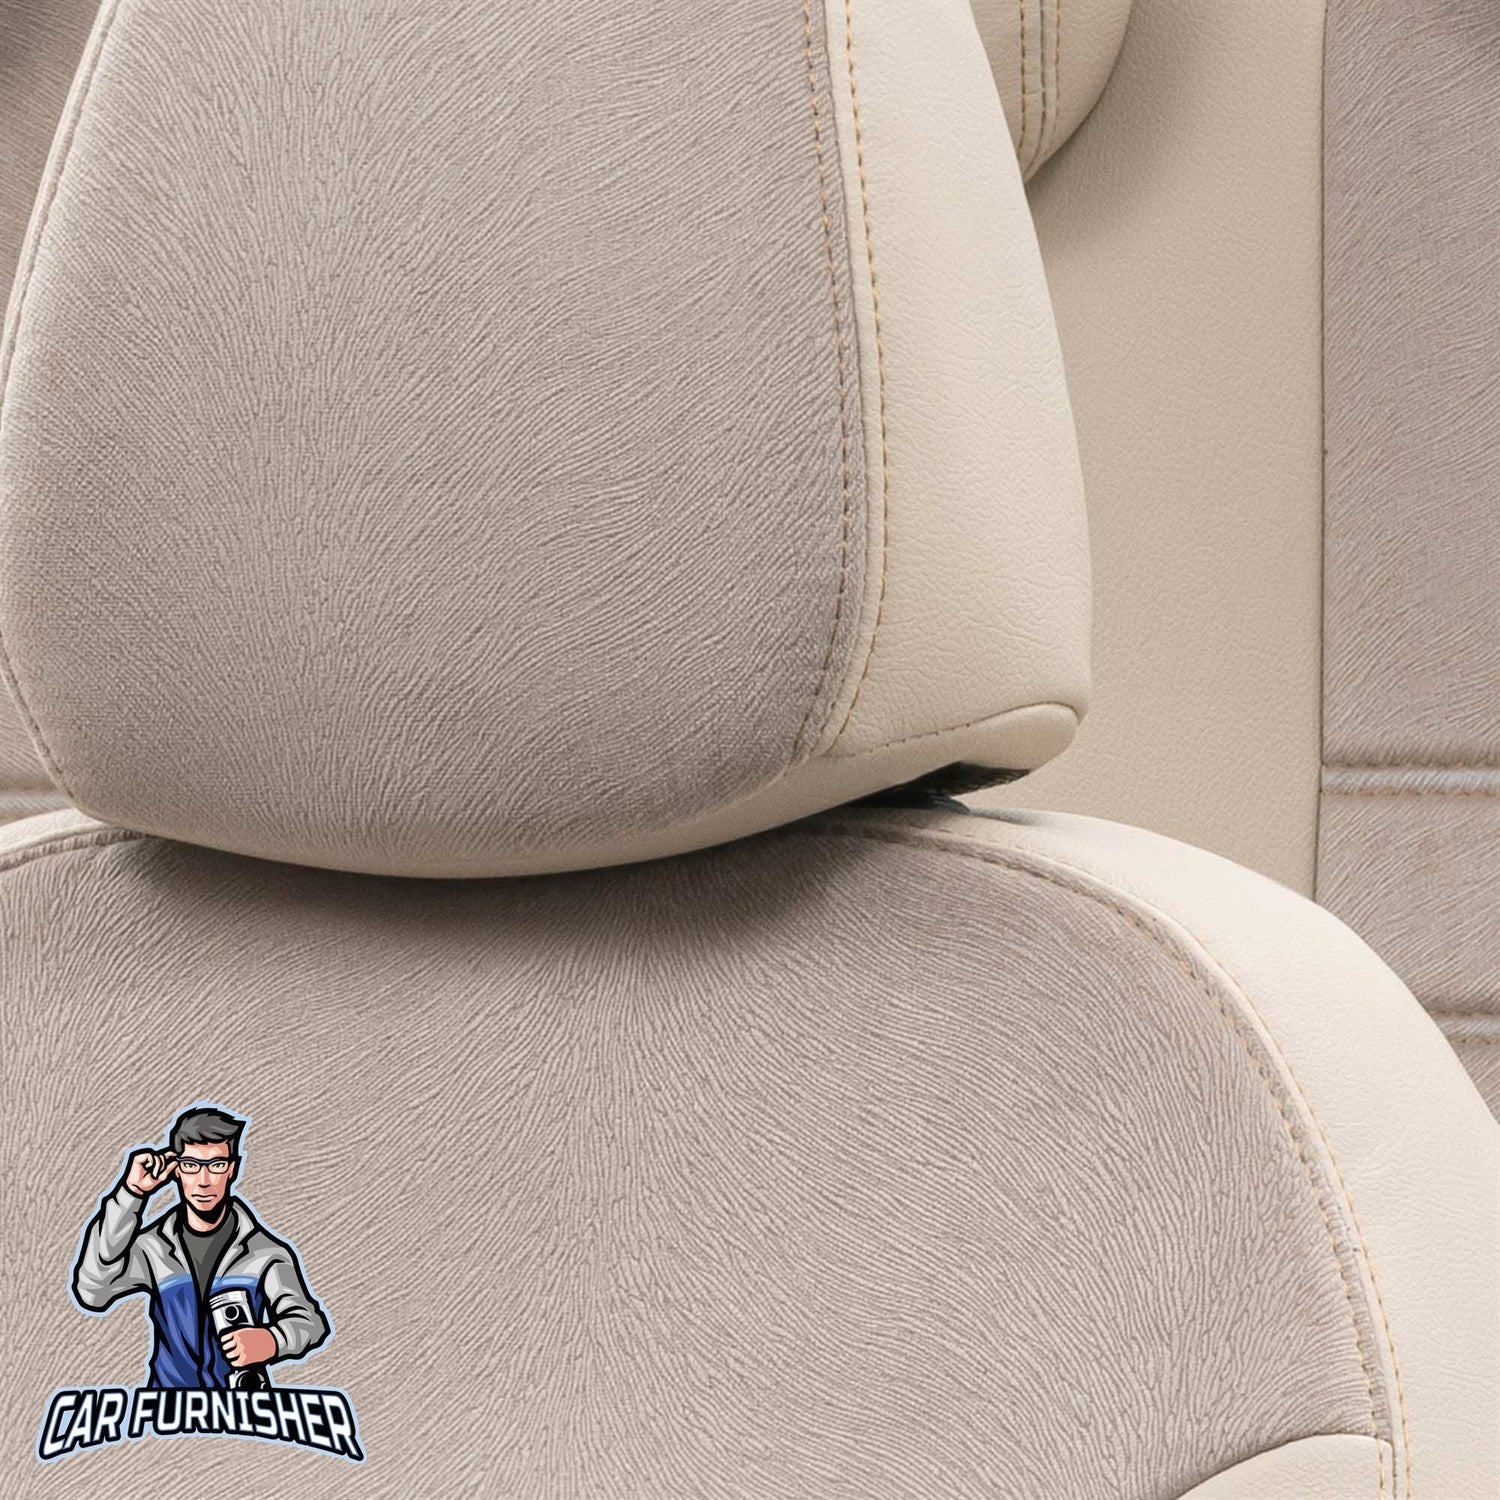 Opel Movano Car Seat Covers 2010-2019 London Design Beige Leather & Fabric